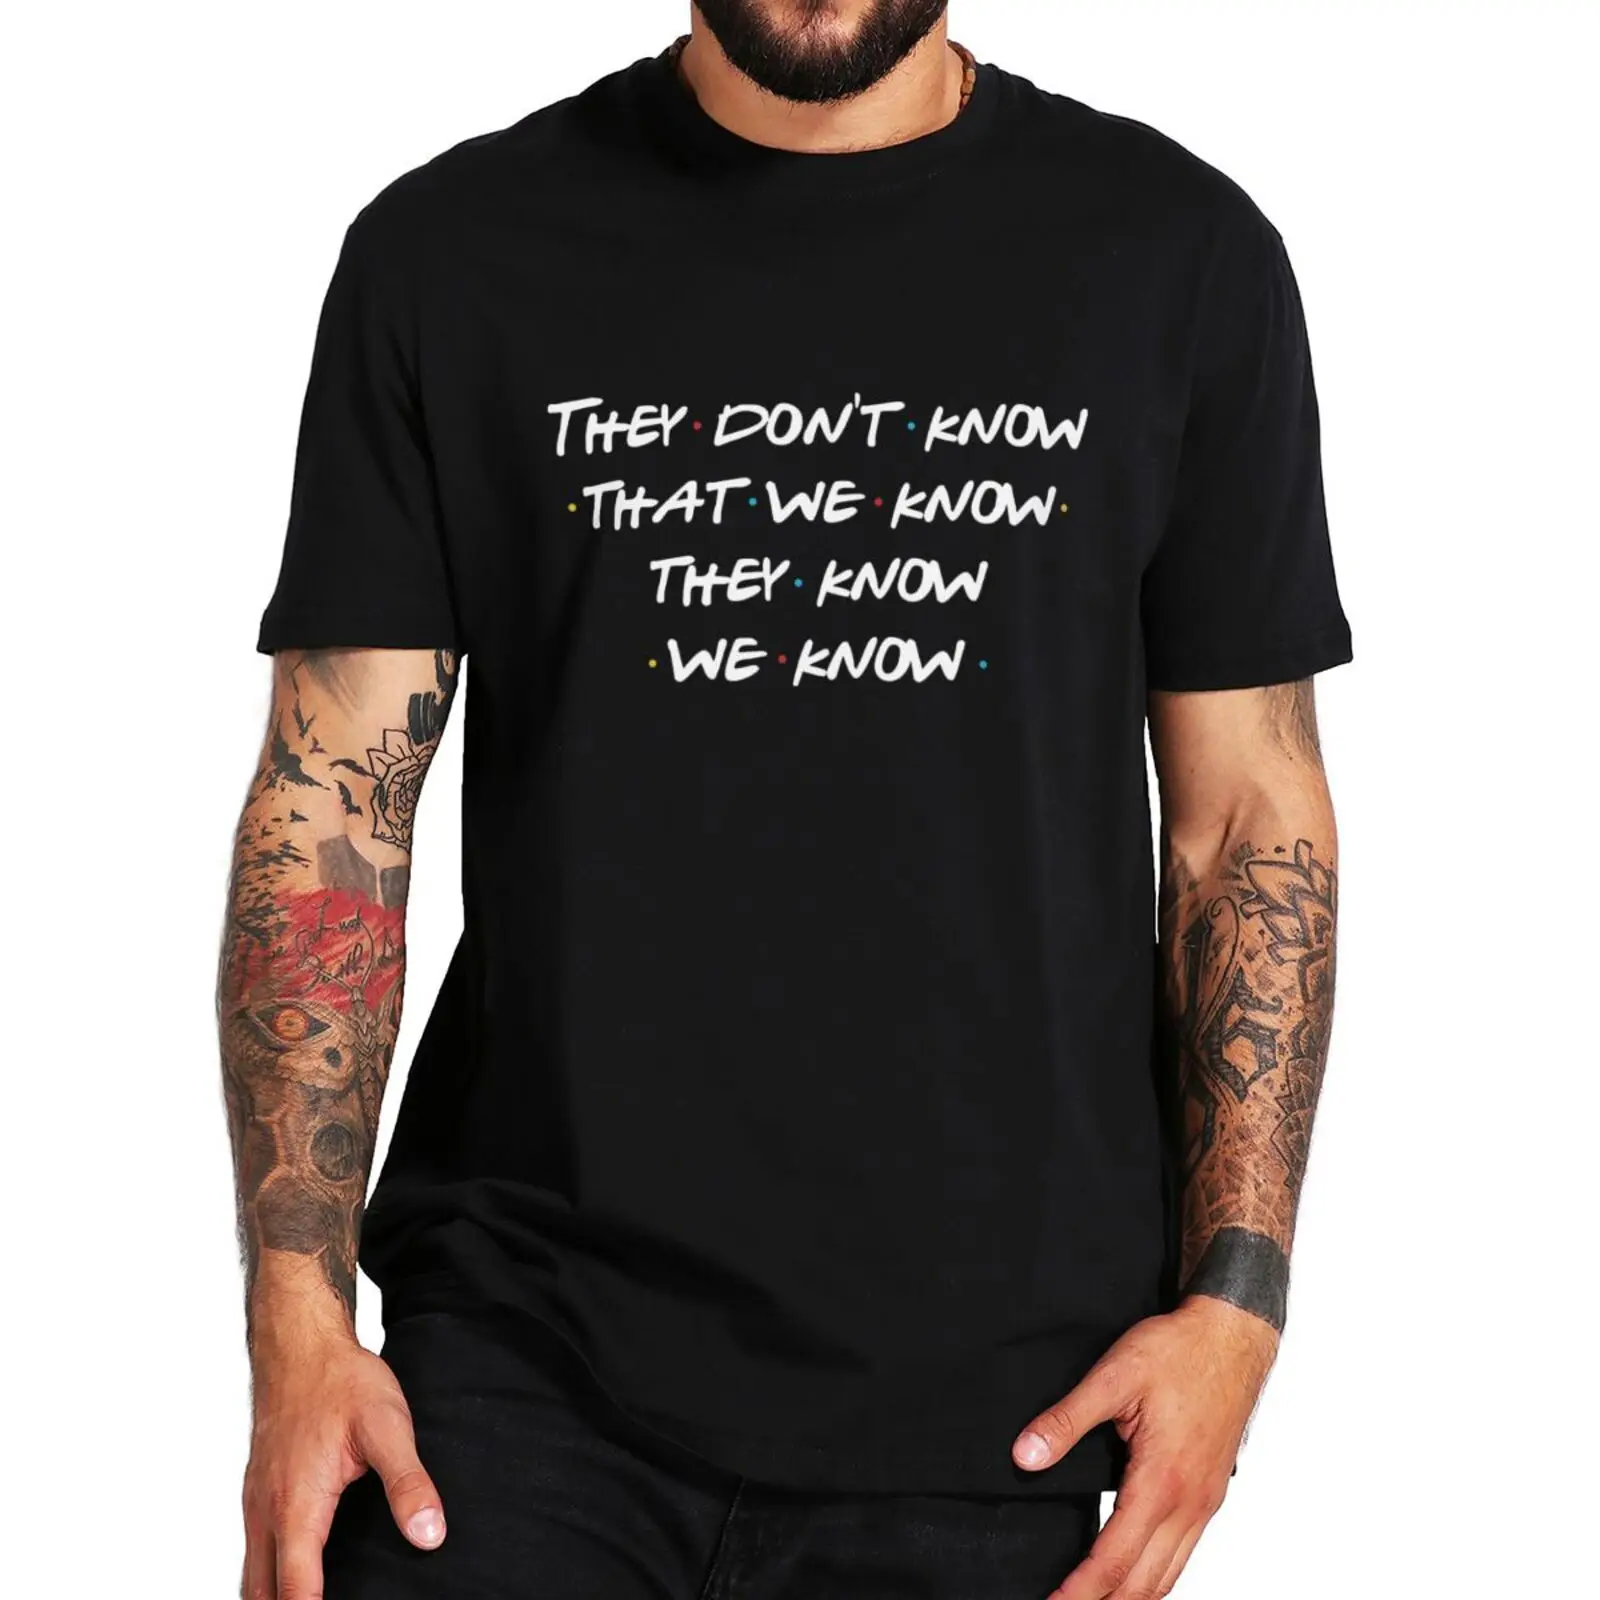 

They Don't Know That We Know T Shirt Funny Comedy Quotes Fans Gift Men Women T-shirts 100% Cotton Unisex Casual Tee Tops EU Size